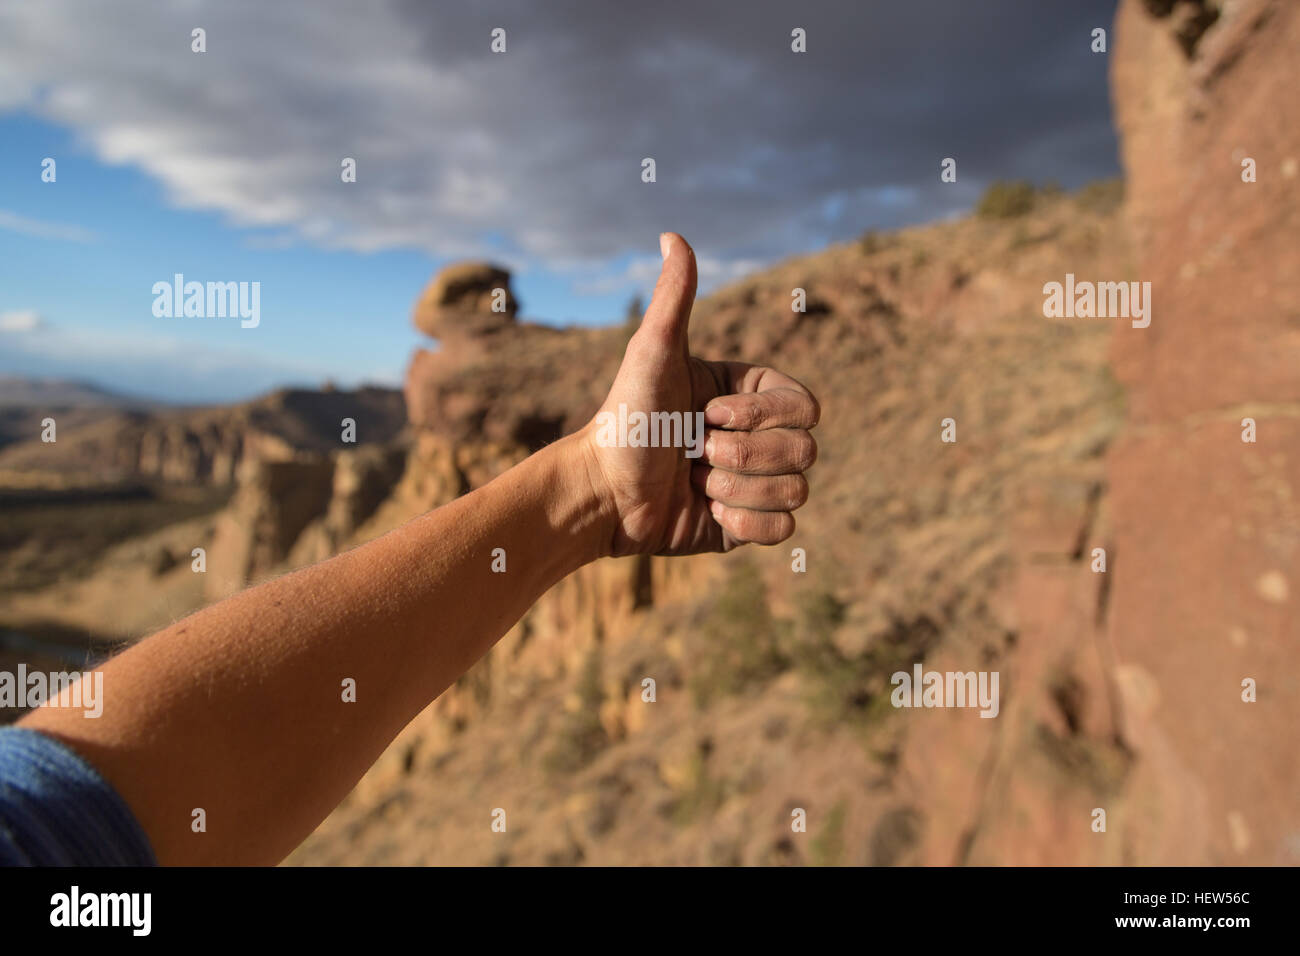 Rock climber giving Thumbs up sign, close-up, Smith Rock State Park, Oregon, USA Banque D'Images